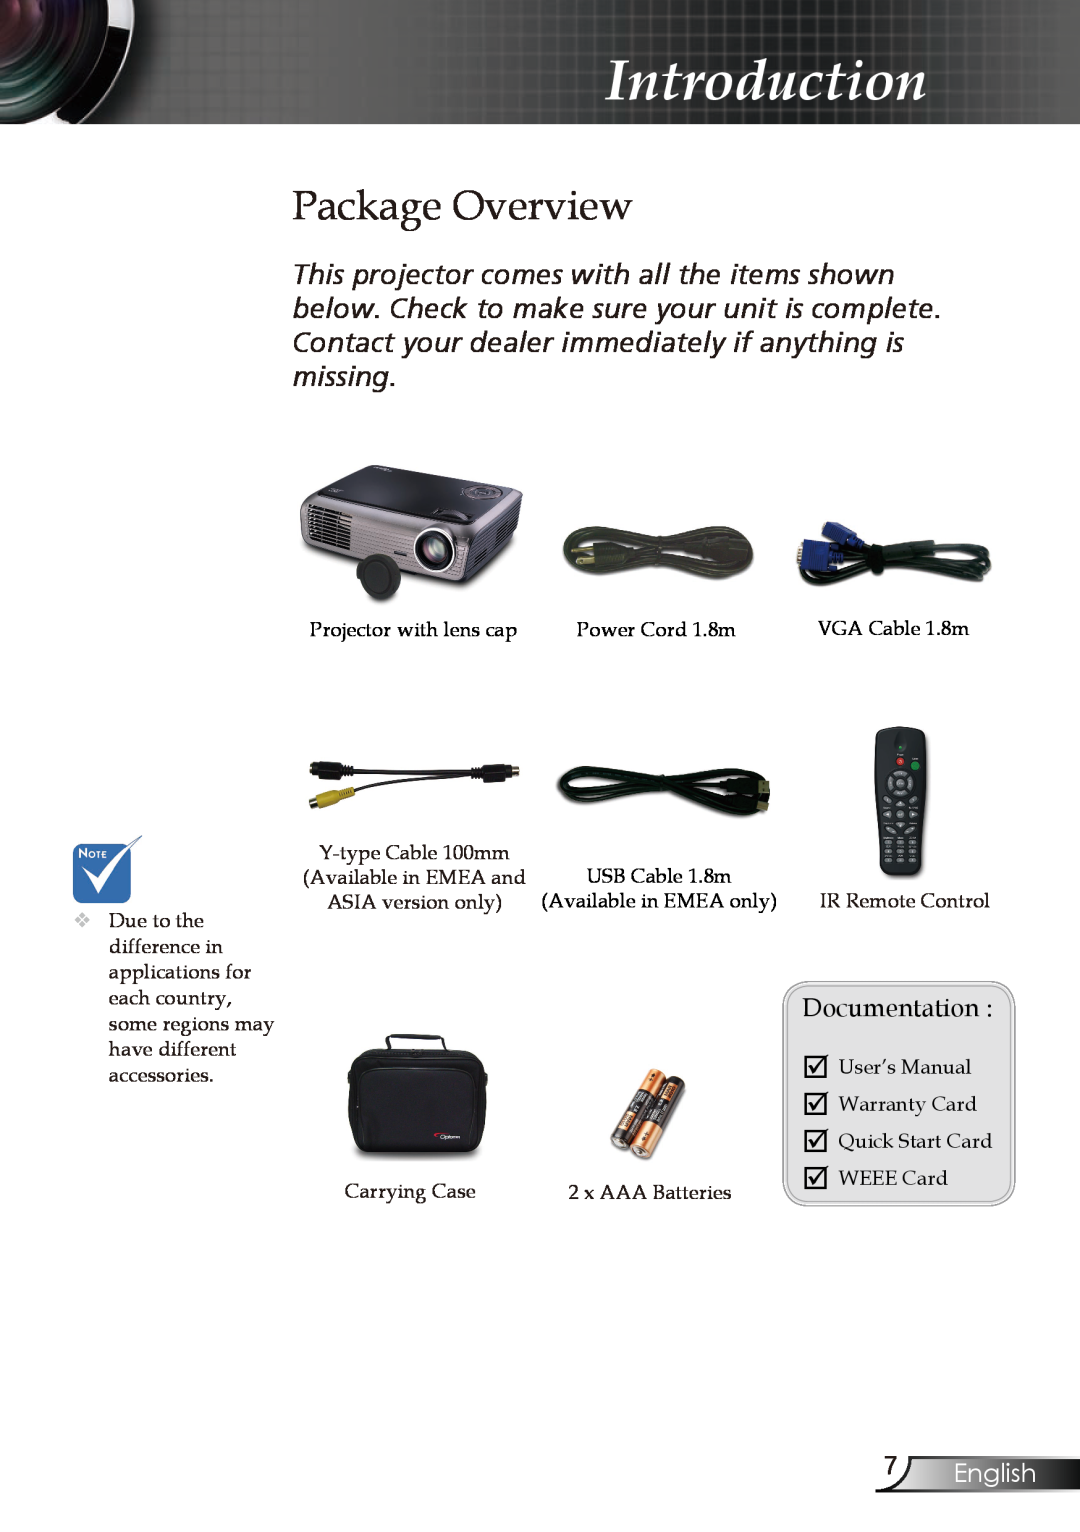 Optoma Technology EP721, EP728, EP727, EP723 manual Package Overview, English, Introduction 